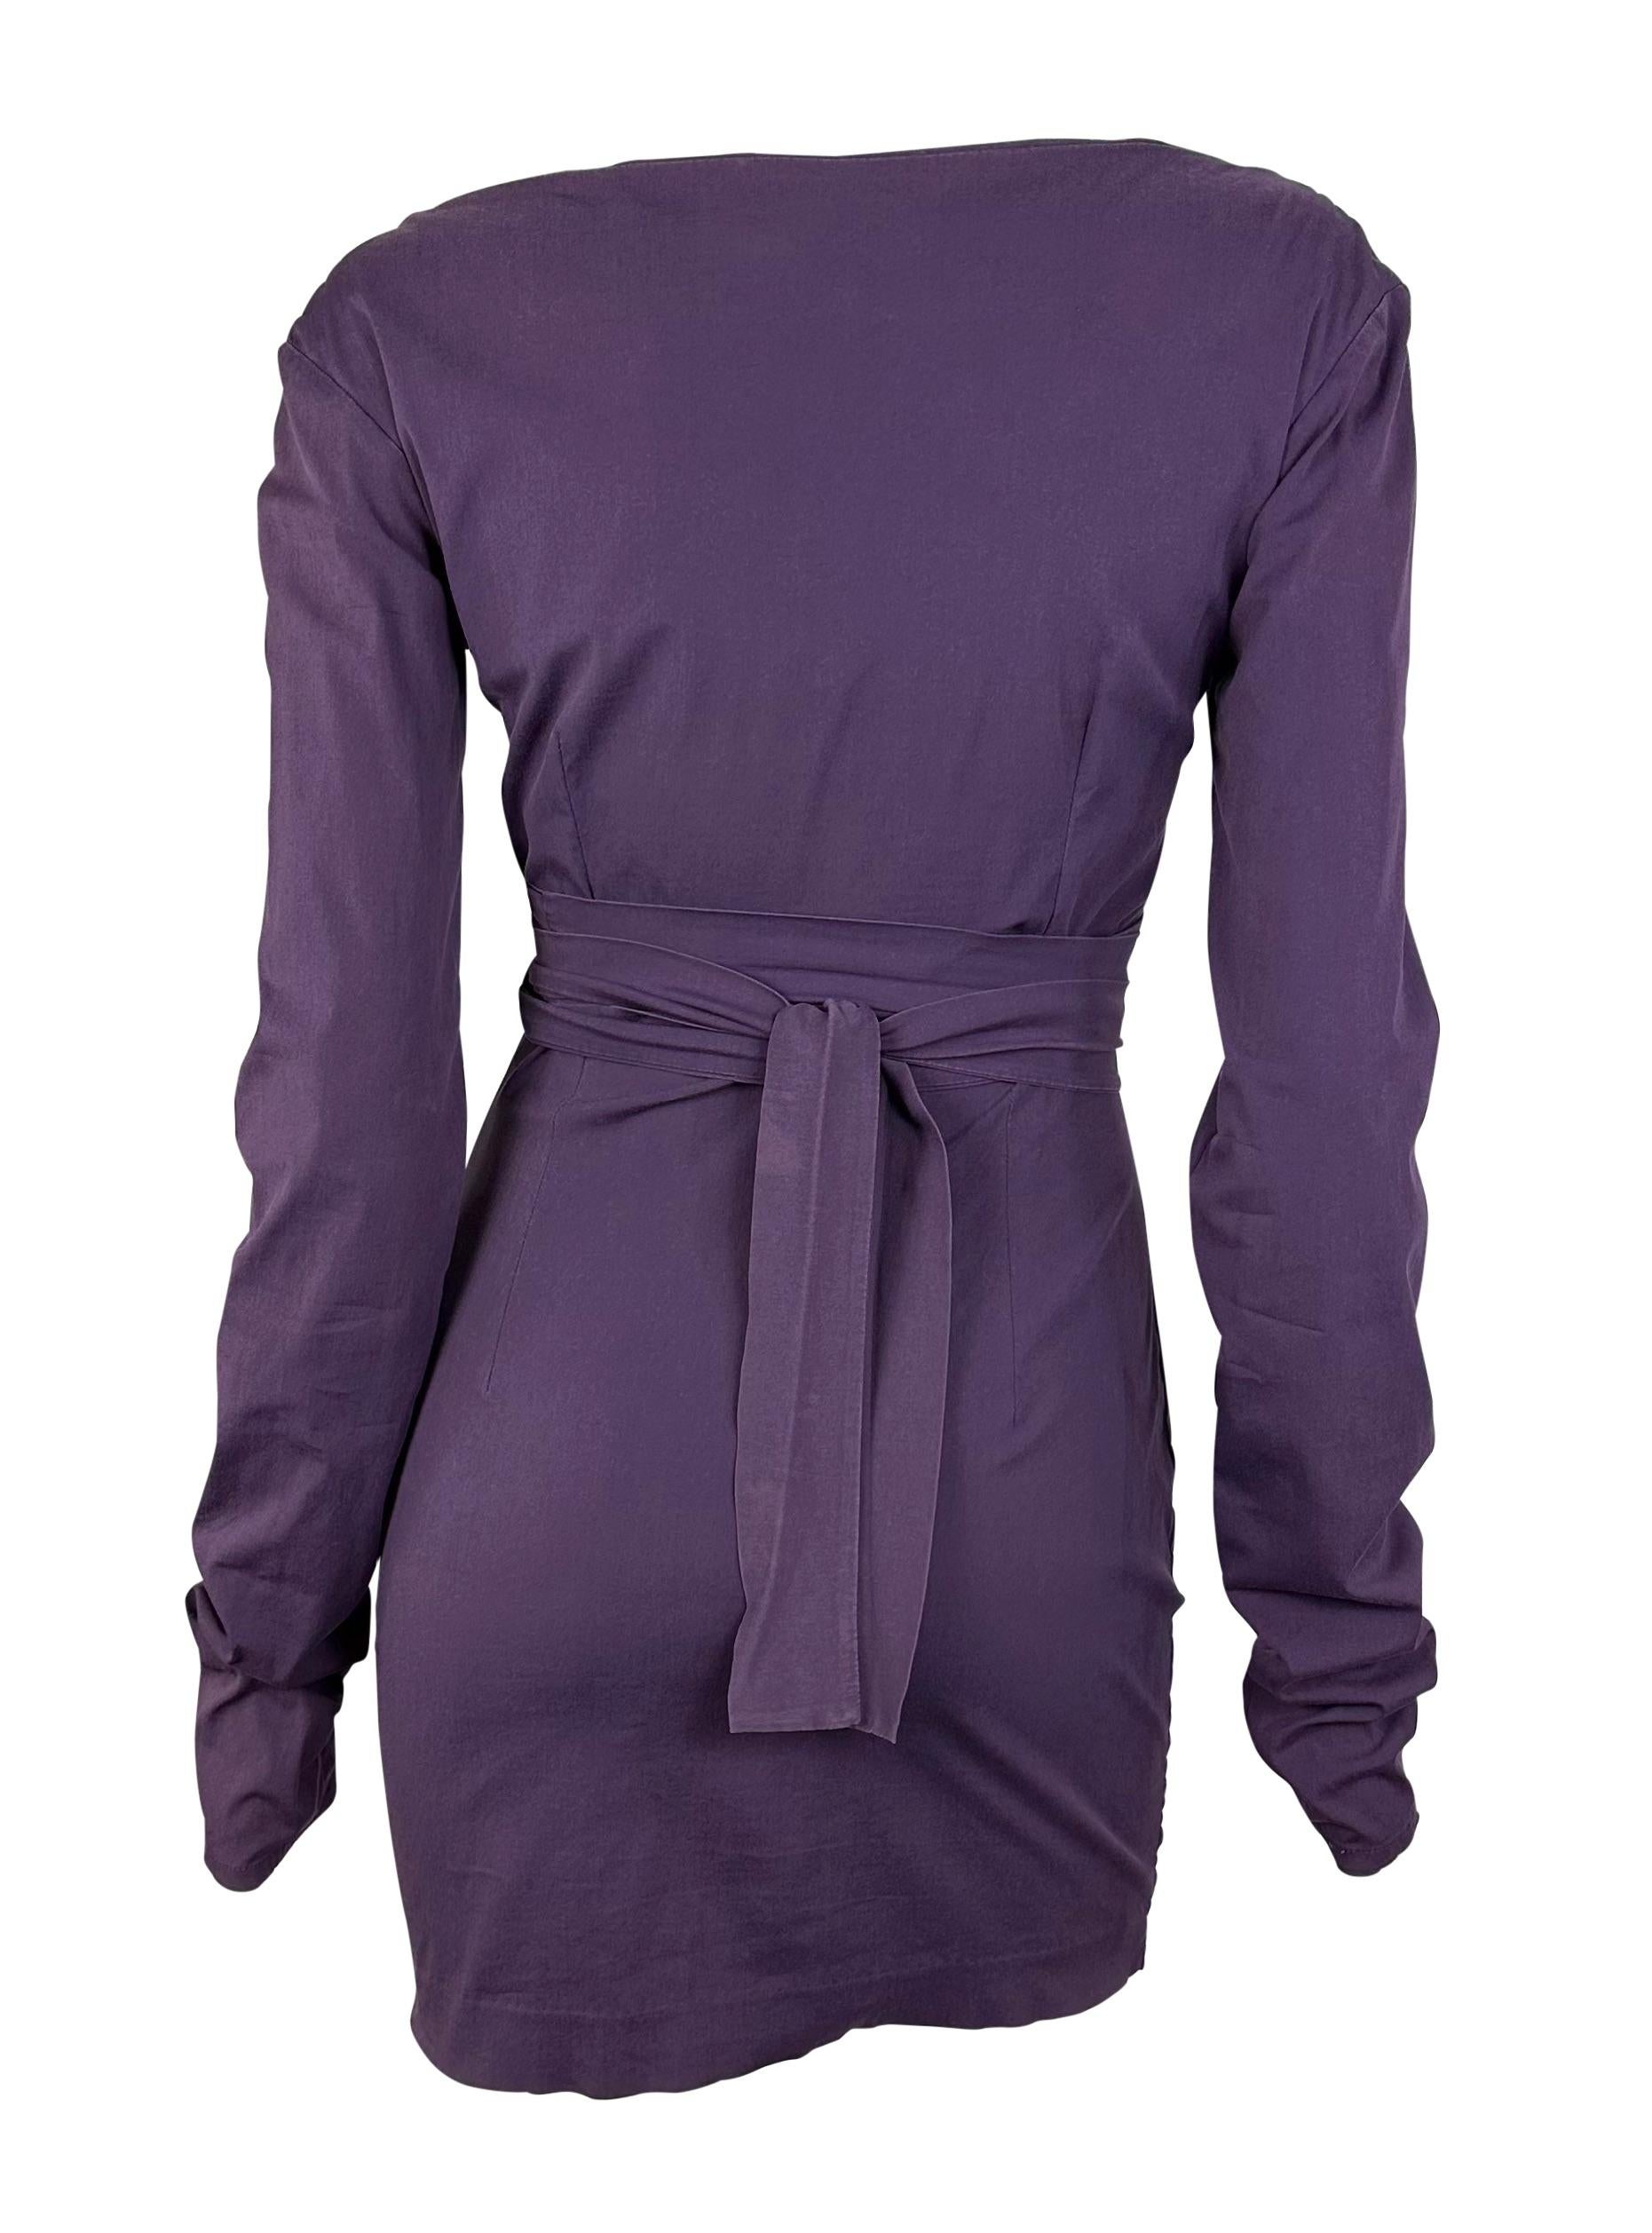 Early 1990s Dolce and Gabbana Purple Long Sleeve Bodycon Dress In Good Condition For Sale In West Hollywood, CA